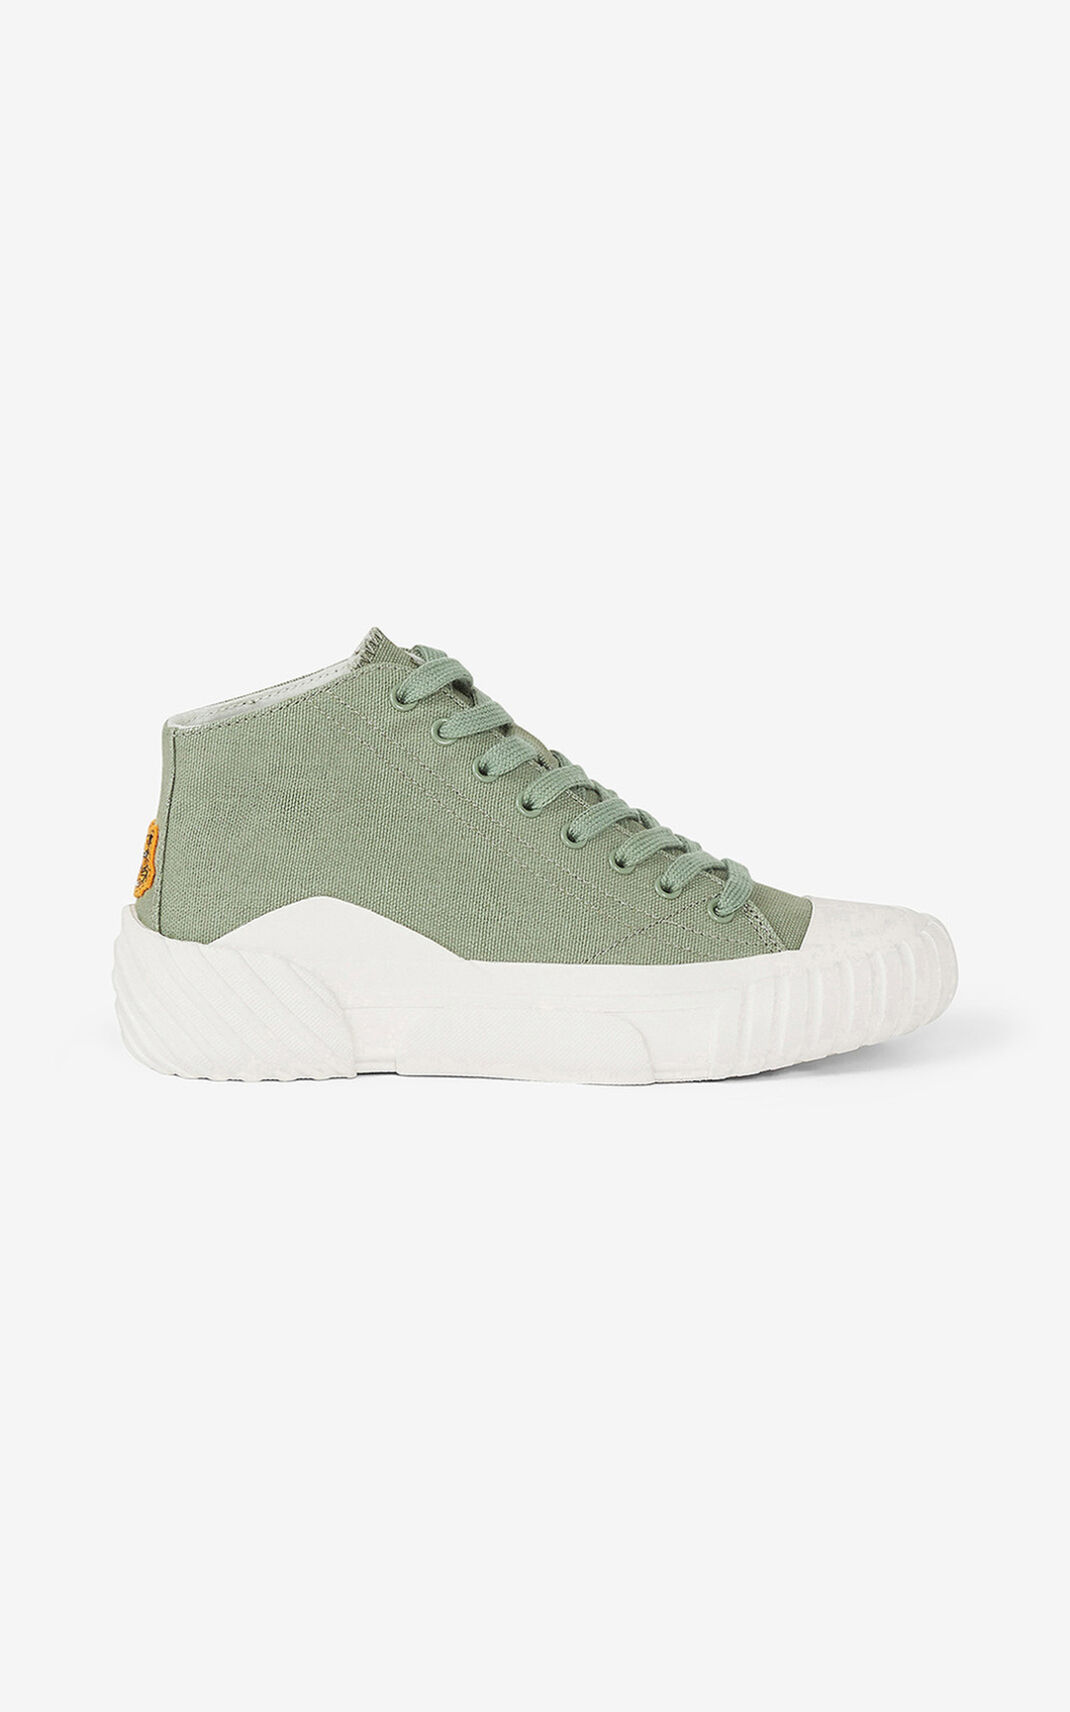 Kenzo Canvas Tiger Crest high top Sneakers Light Green For Womens 9724QGKWC